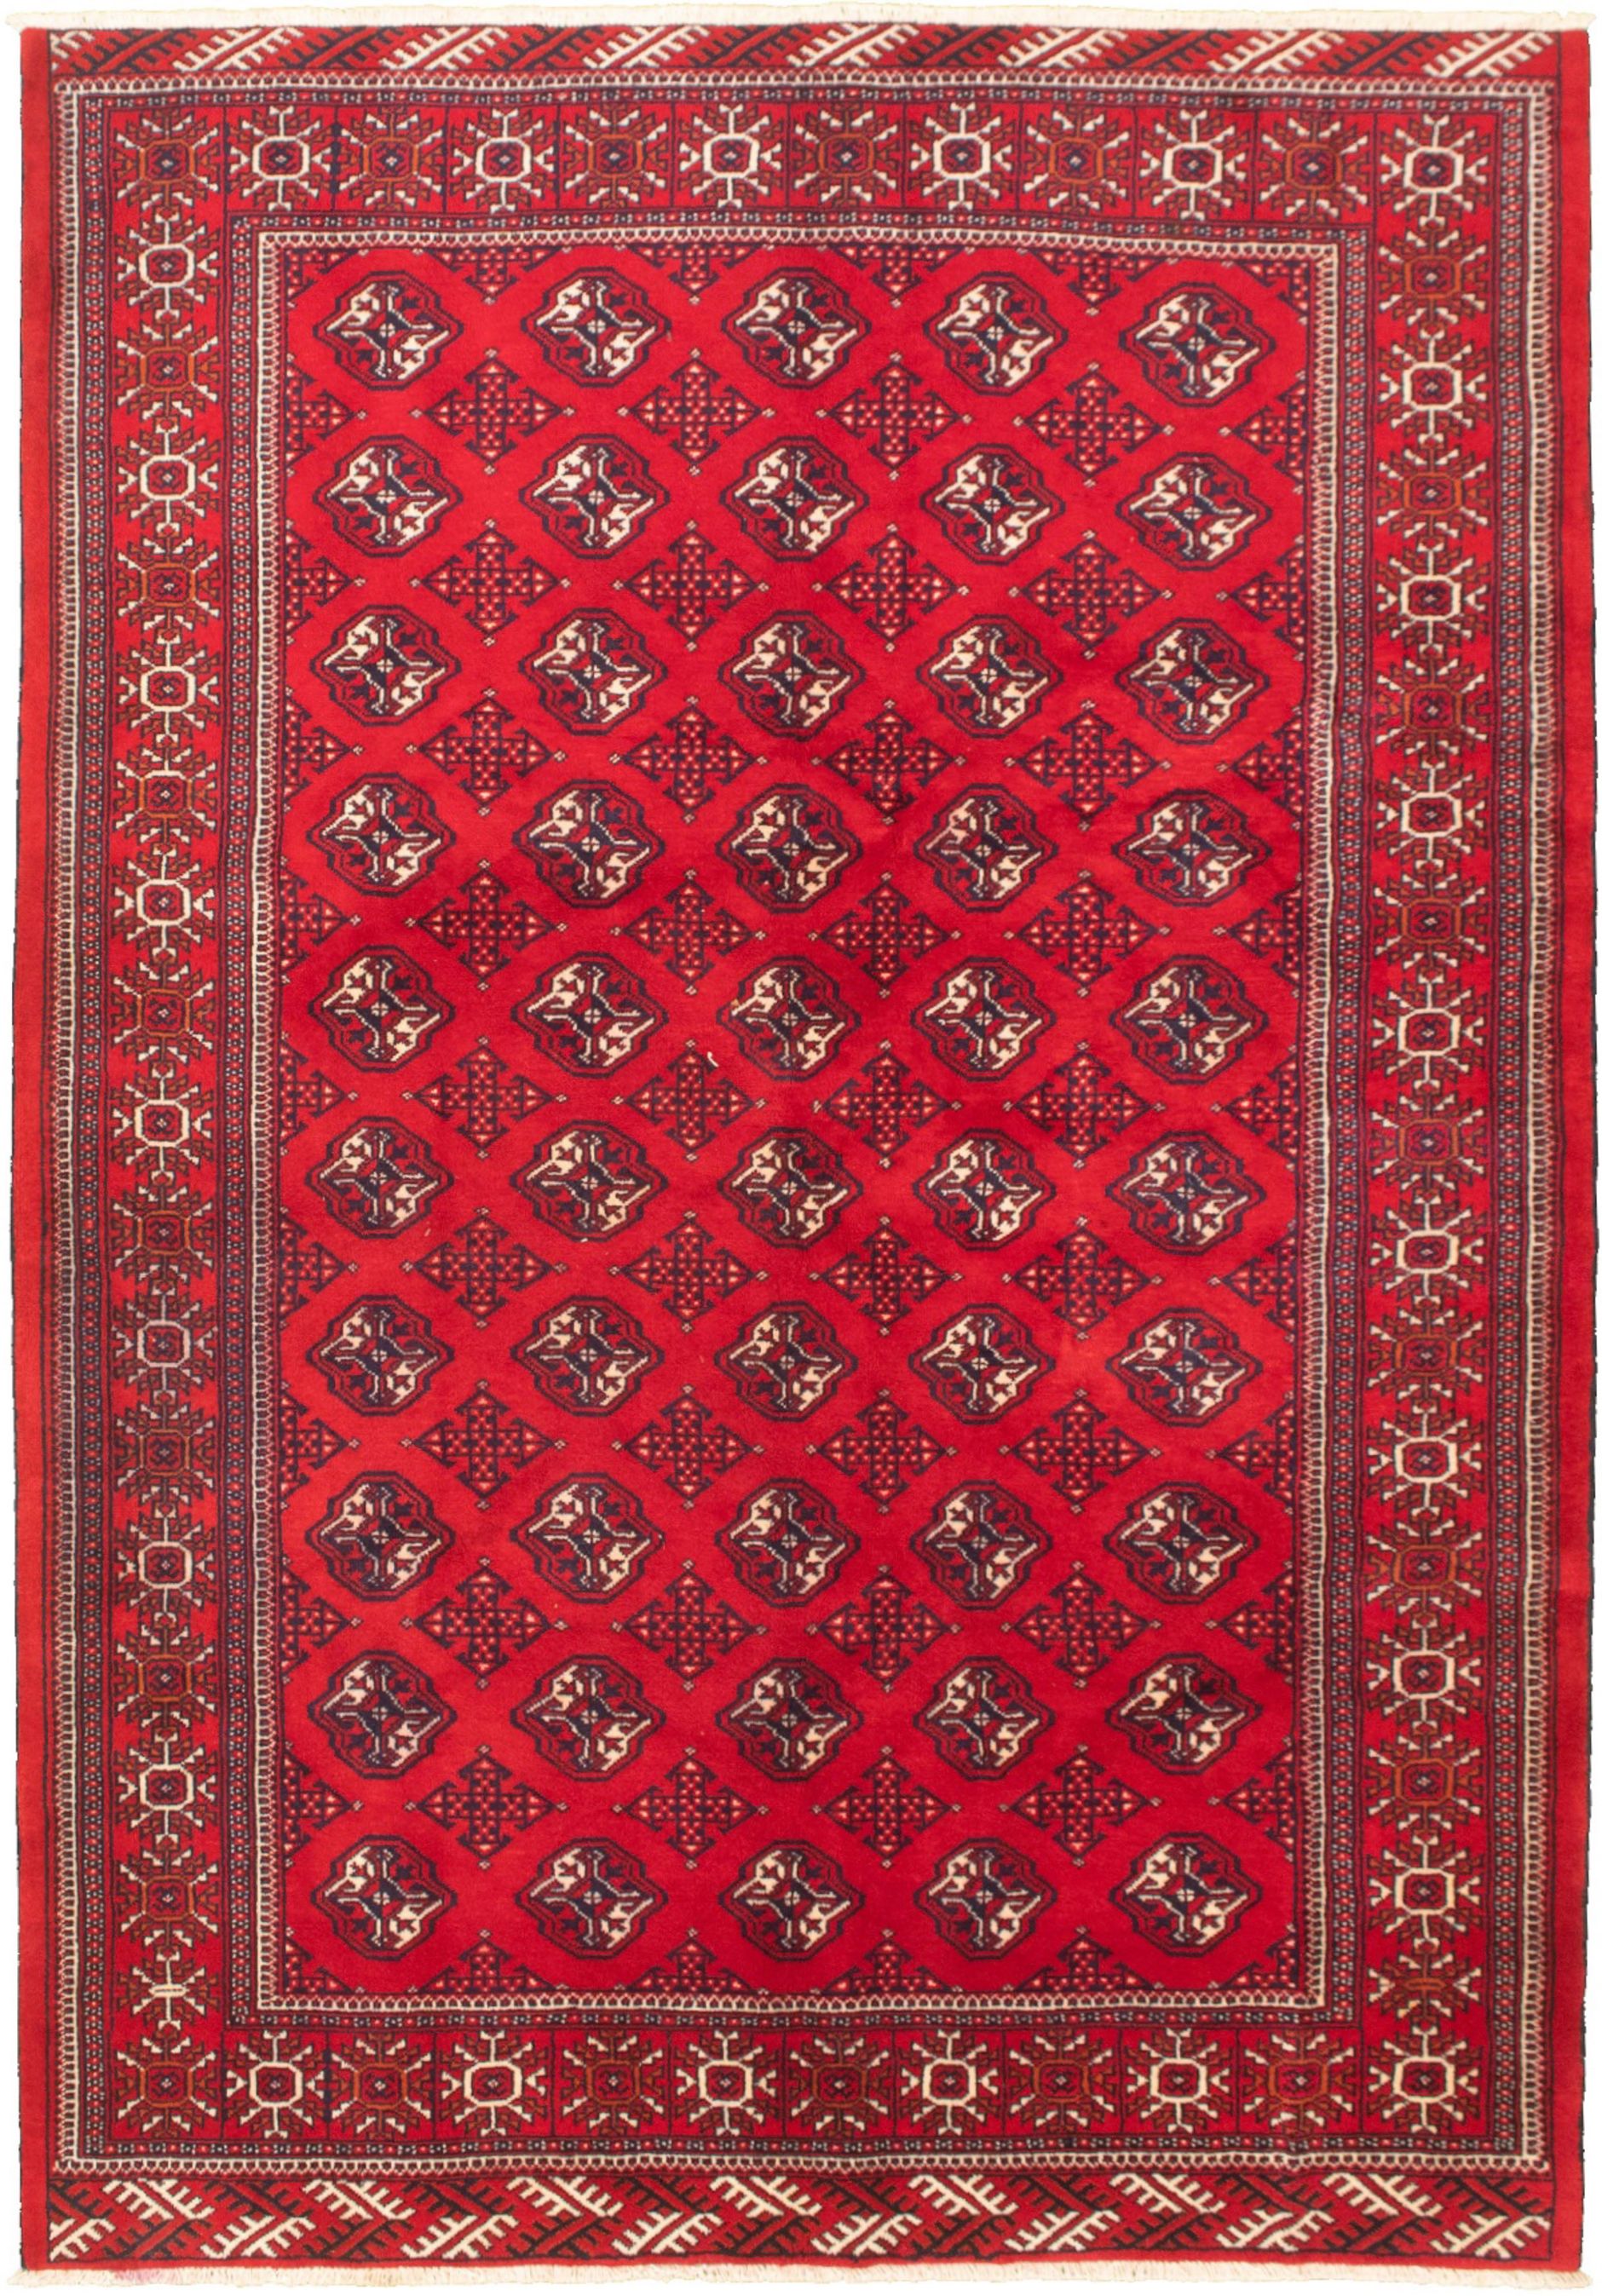 Hand-knotted Shiravan Bokhara Red Wool Rug 6'6" x 9'7" Size: 6'6" x 9'7"  